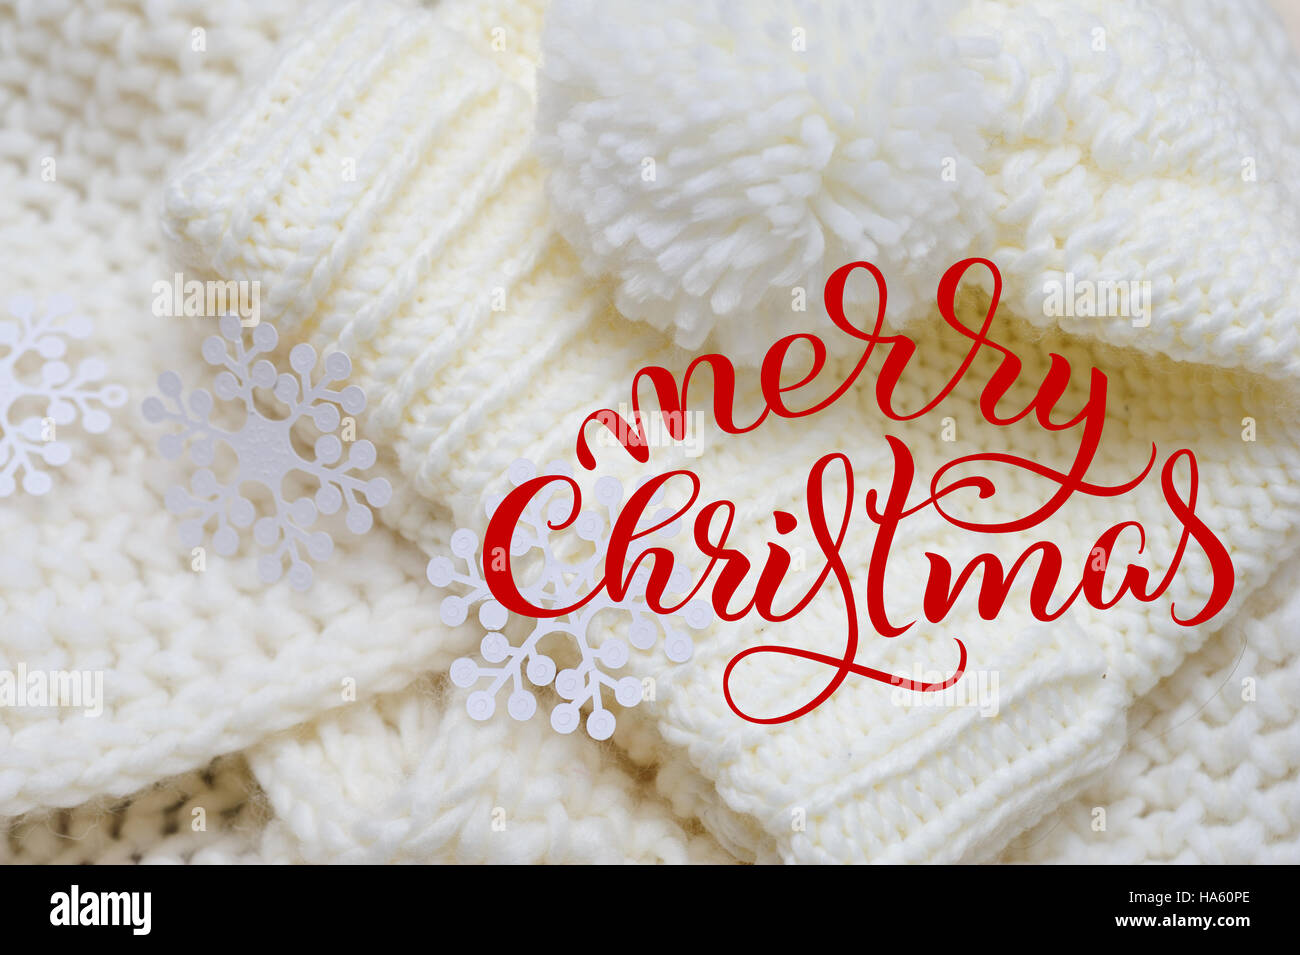 White knit scarf and hat for background with text Merry Christmas. Calligraphy lettering Stock Photo